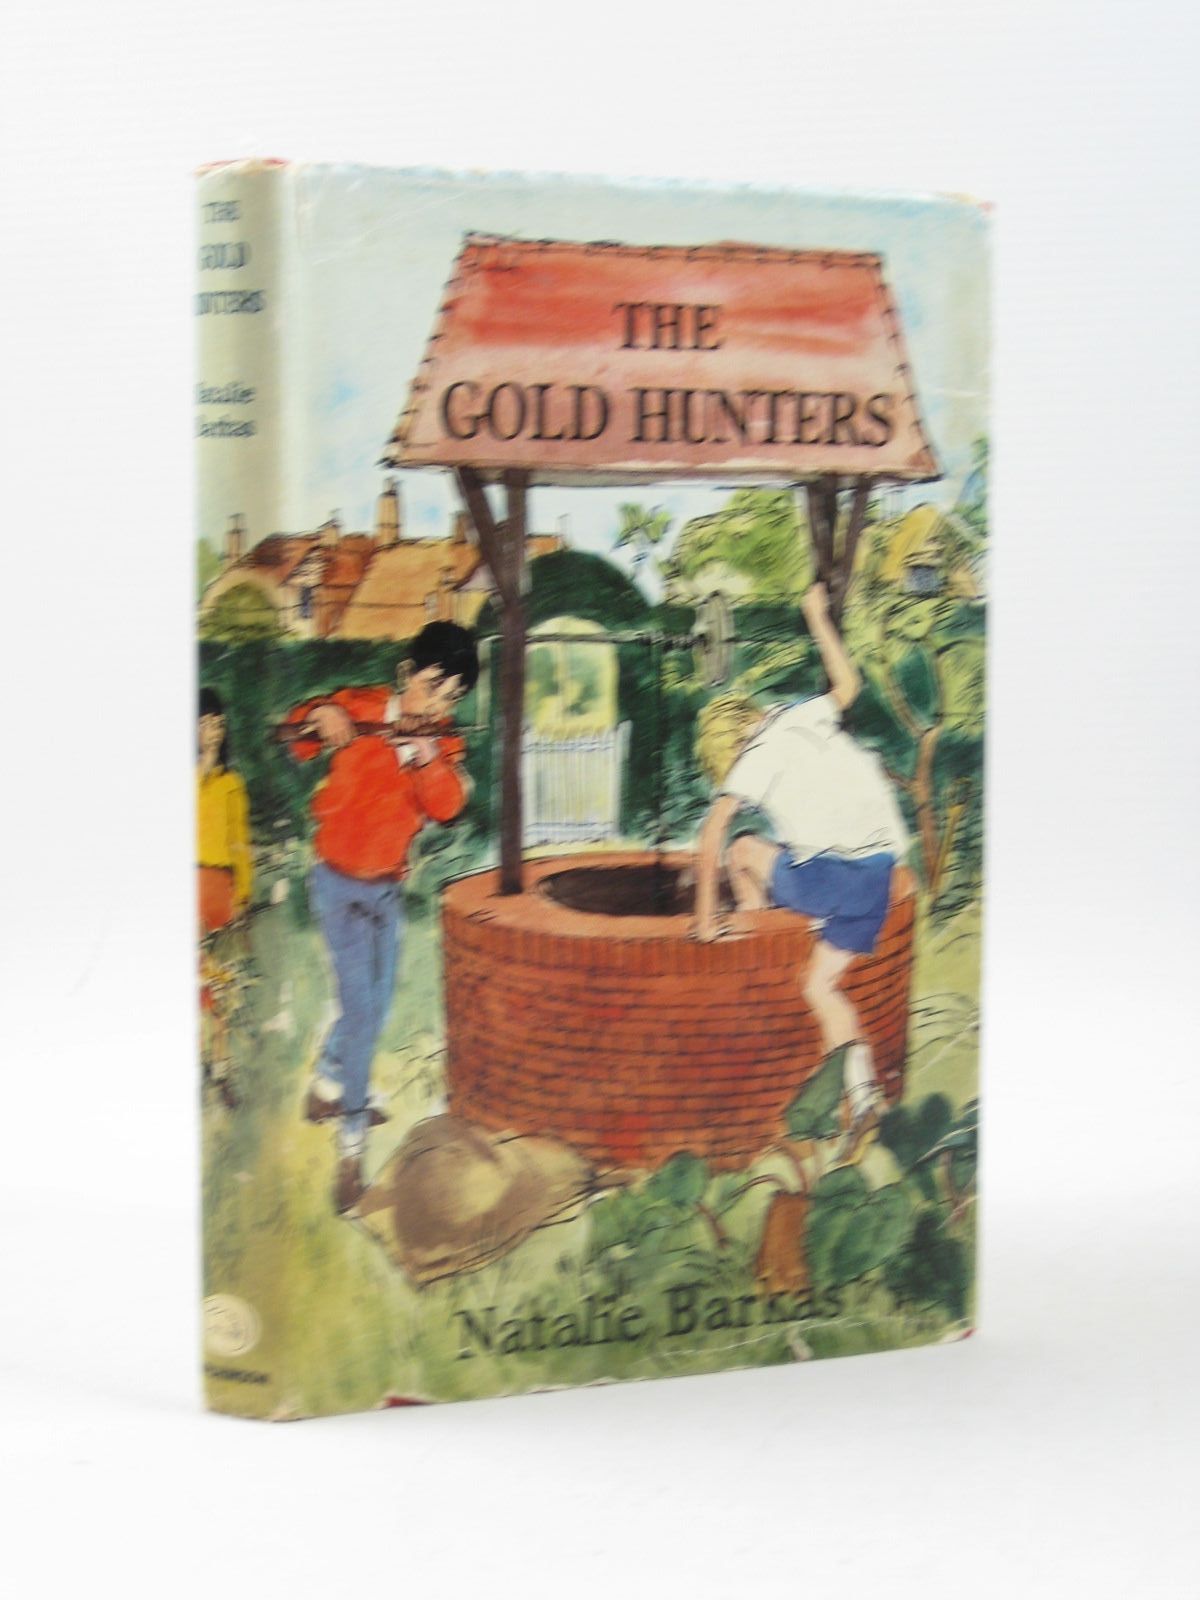 Cover of THE GOLD HUNTERS by Natalie Barkas